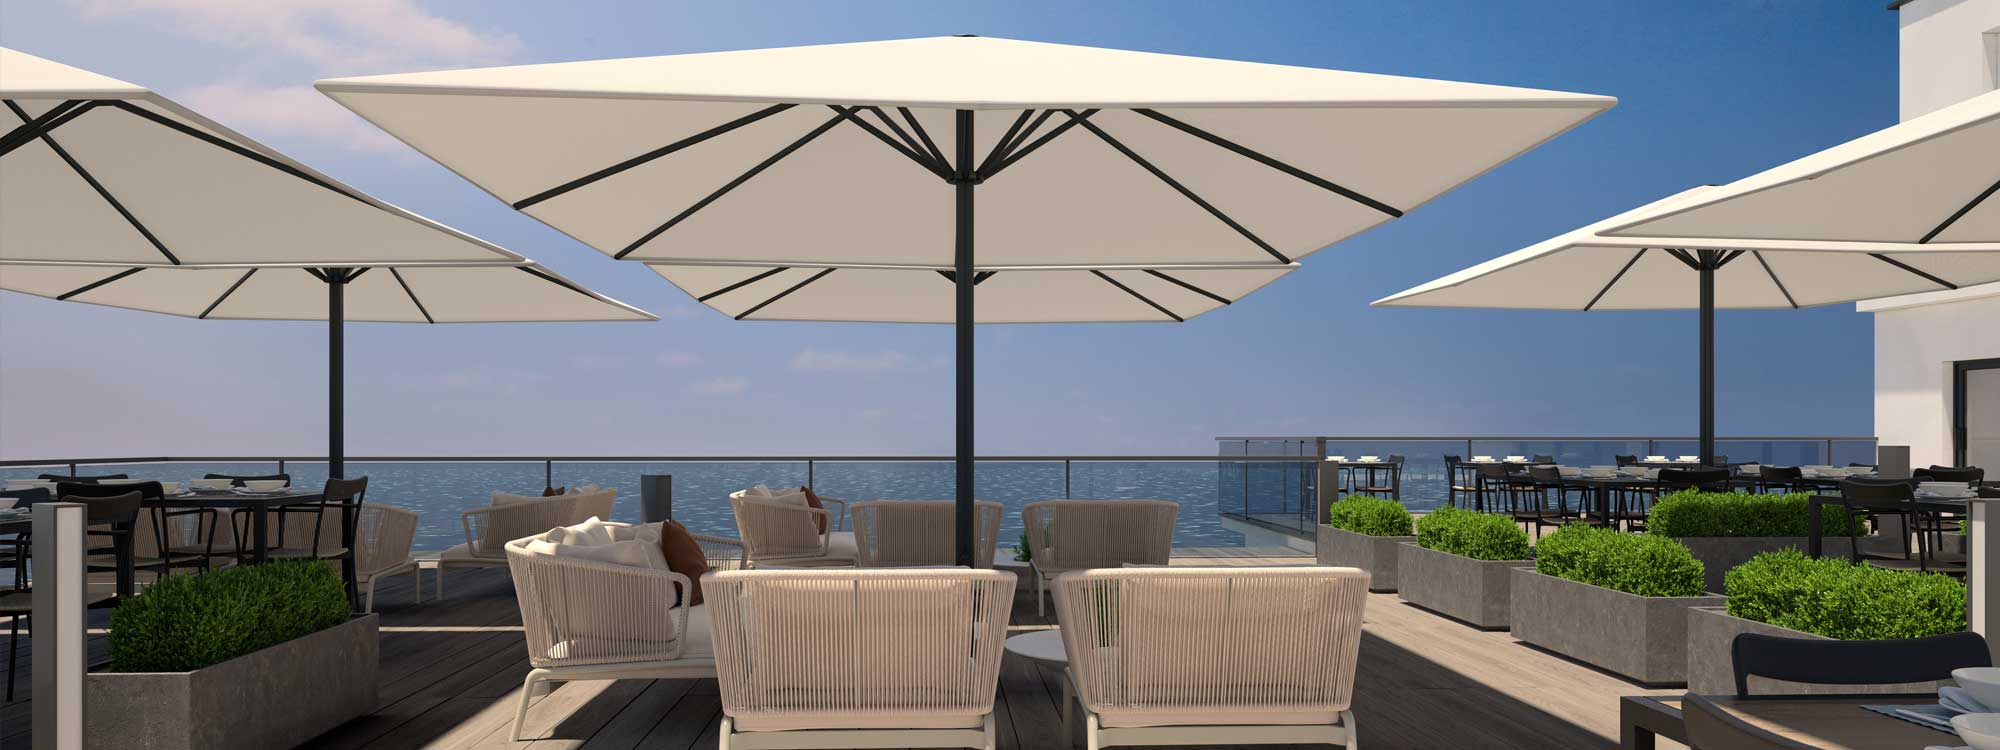 Image of Prostor P8 large mast parasols above outdoor furniture in beachside cafe and restaurant